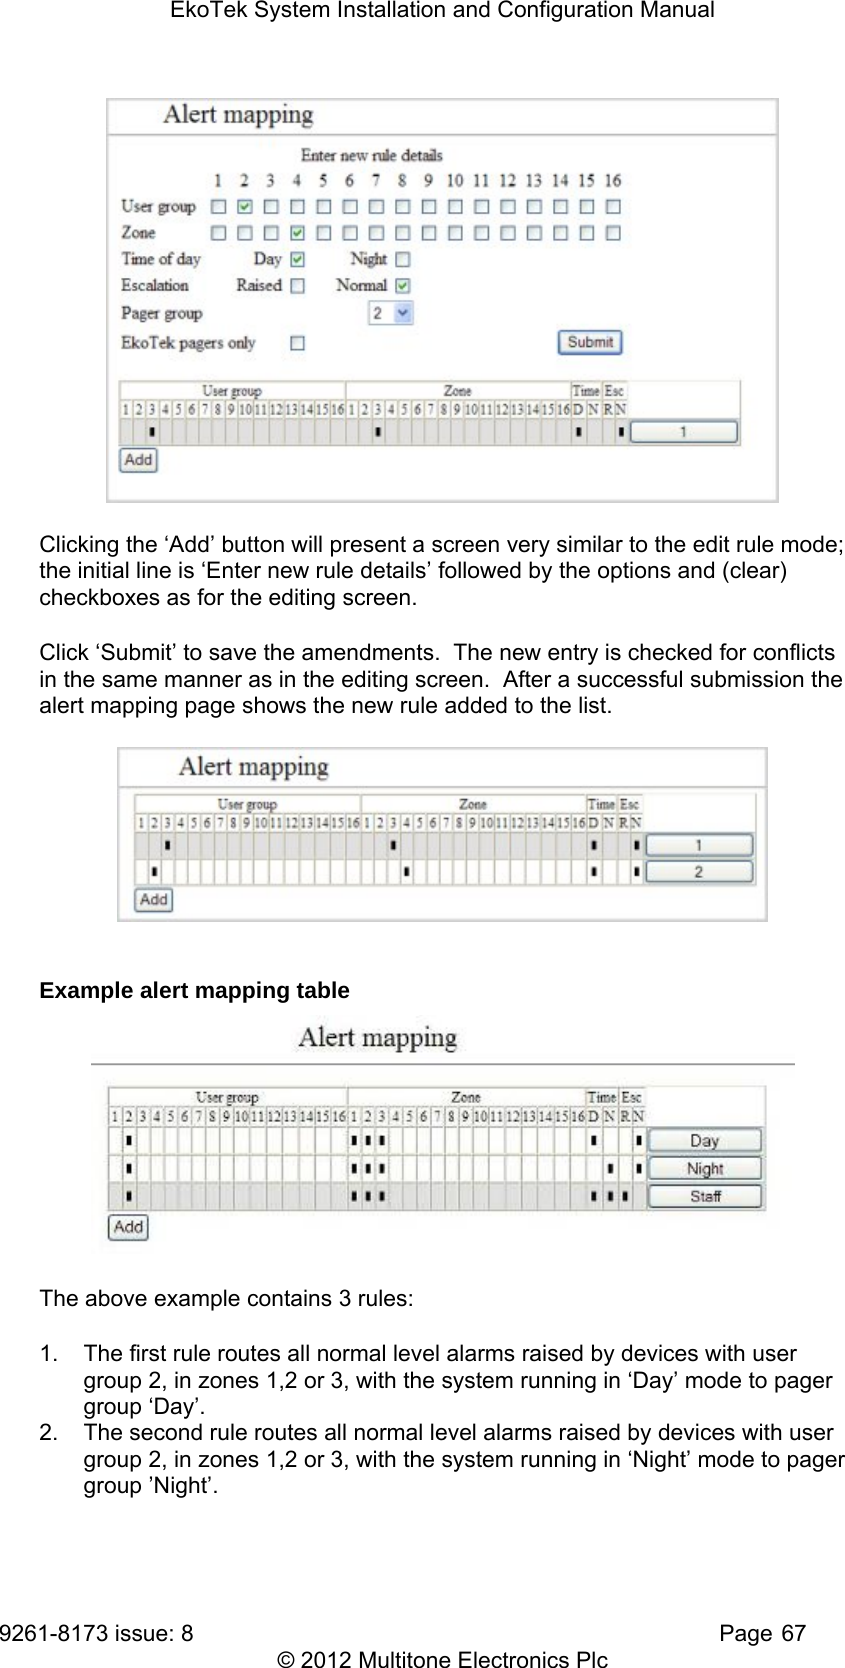 EkoTek System Installation and Configuration Manual 9261-8173 issue: 8   Page 67 © 2012 Multitone Electronics Plc  Clicking the ‘Add’ button will present a screen very similar to the edit rule mode; the initial line is ‘Enter new rule details’ followed by the options and (clear) checkboxes as for the editing screen. Click ‘Submit’ to save the amendments.  The new entry is checked for conflicts in the same manner as in the editing screen.  After a successful submission the alert mapping page shows the new rule added to the list.   Example alert mapping table  The above example contains 3 rules: 1.  The first rule routes all normal level alarms raised by devices with user group 2, in zones 1,2 or 3, with the system running in ‘Day’ mode to pager group ‘Day’. 2.  The second rule routes all normal level alarms raised by devices with user group 2, in zones 1,2 or 3, with the system running in ‘Night’ mode to pager group ’Night’. 